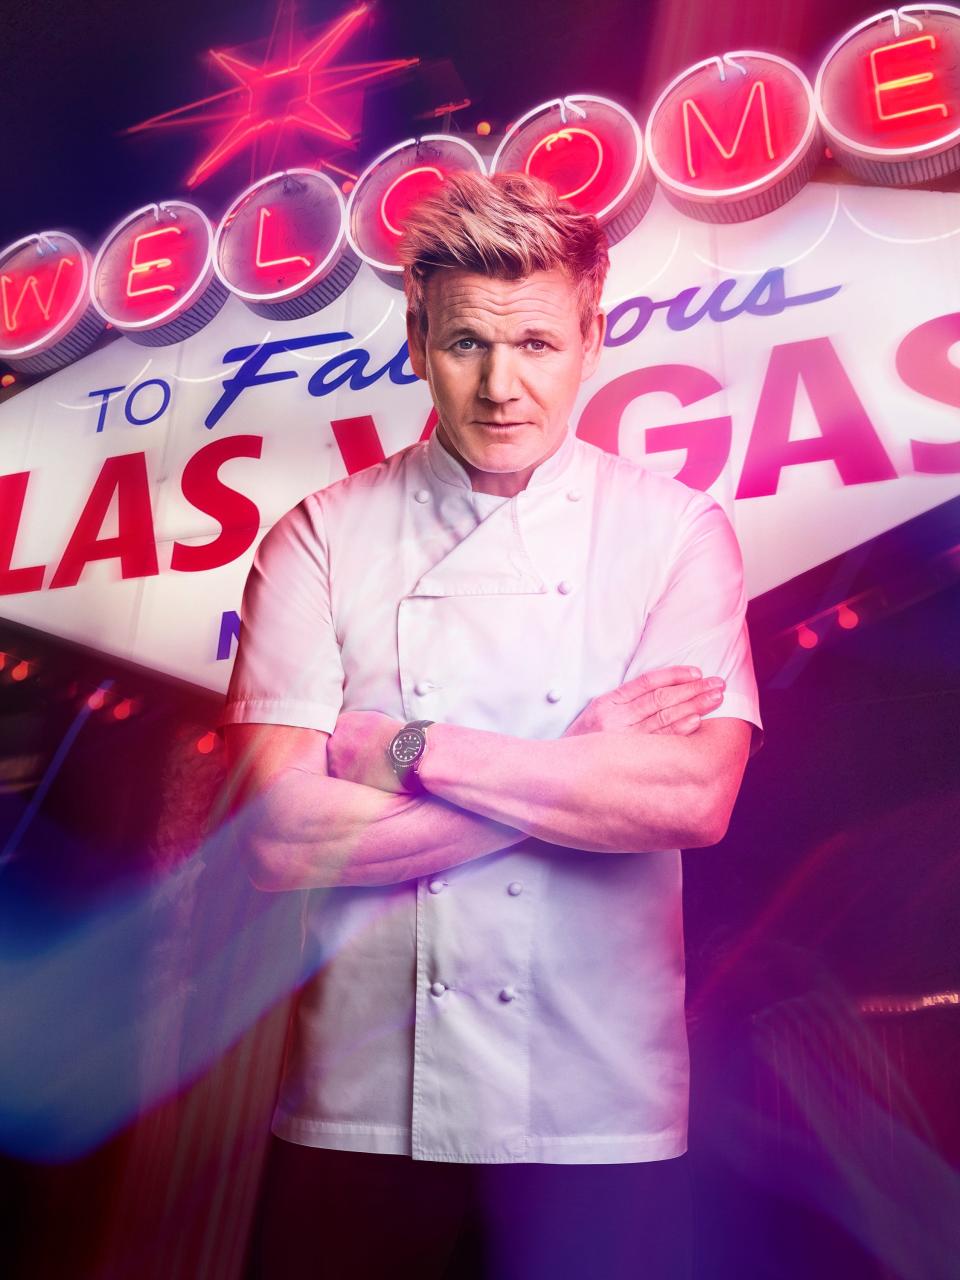 Gordon Ramsay will host two shows on Fox this fall.